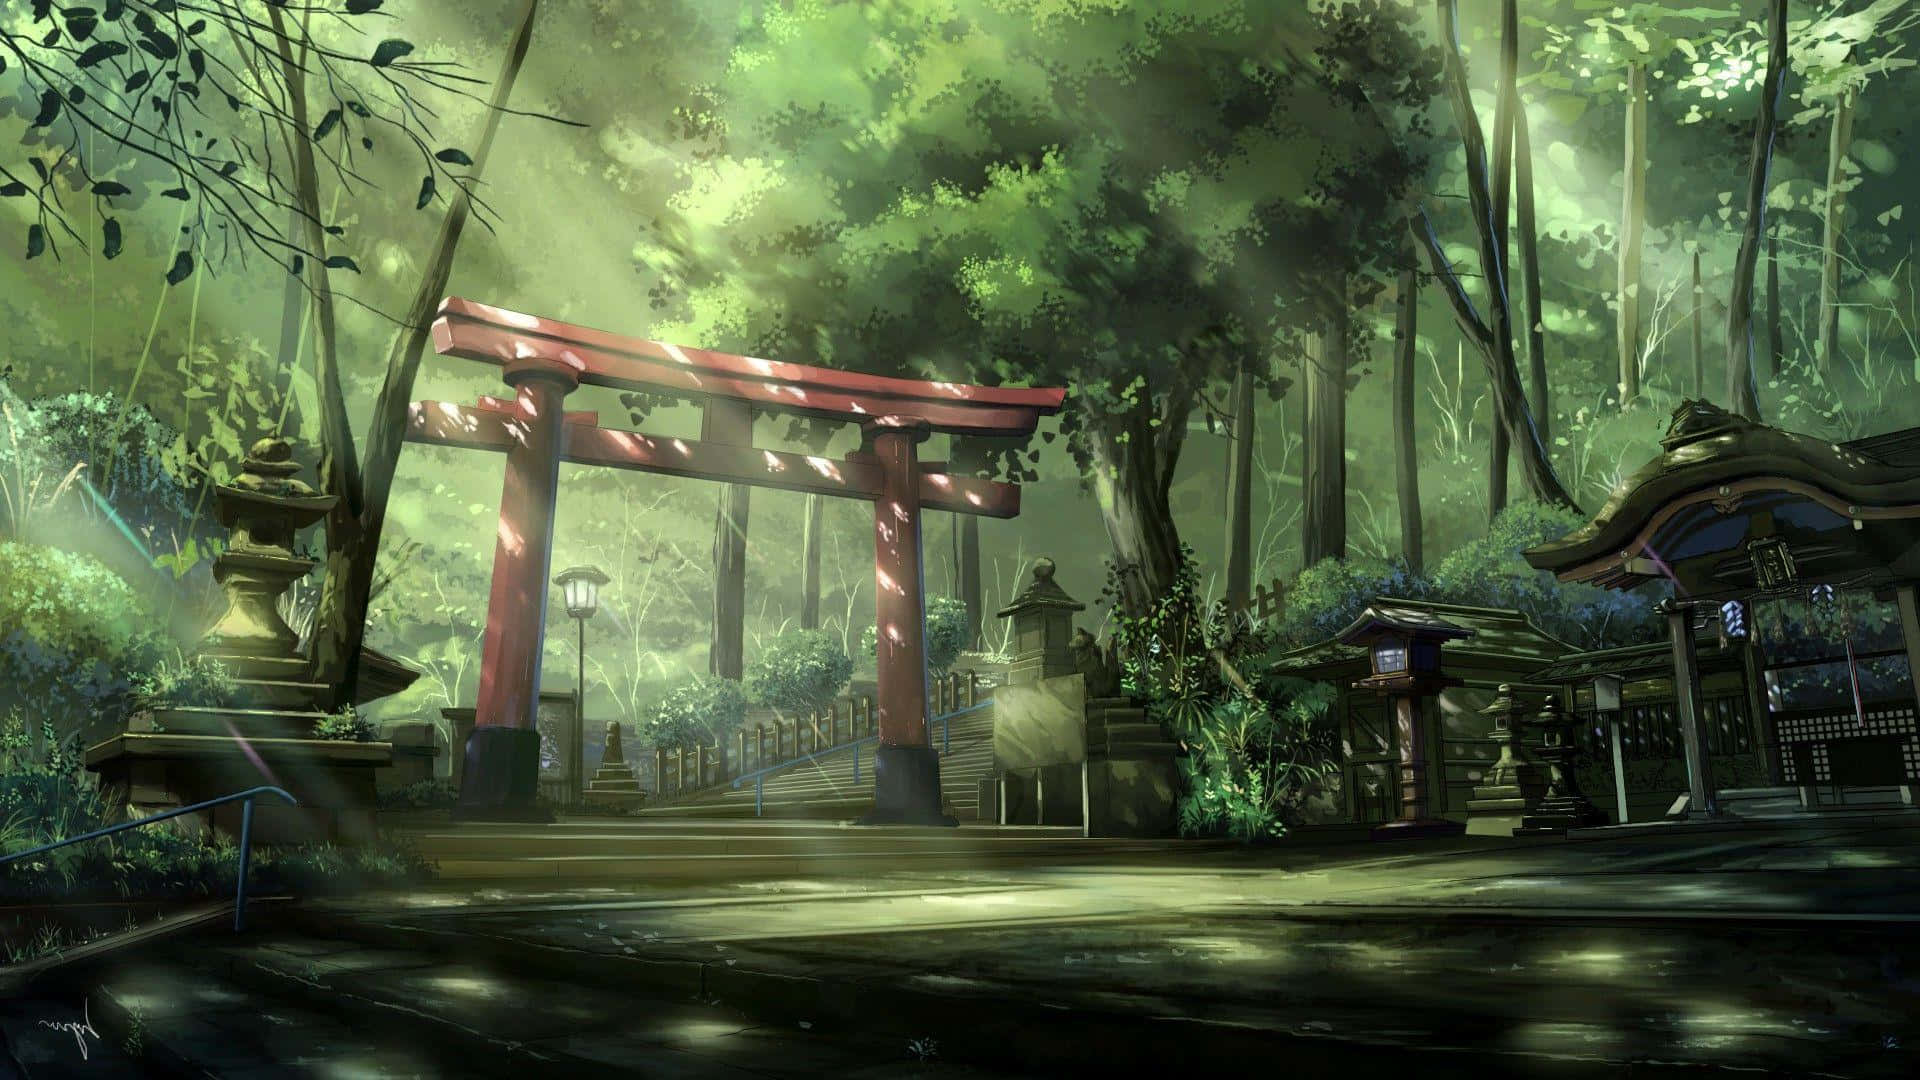 Wander and immerse yourself in the magical Anime Forest